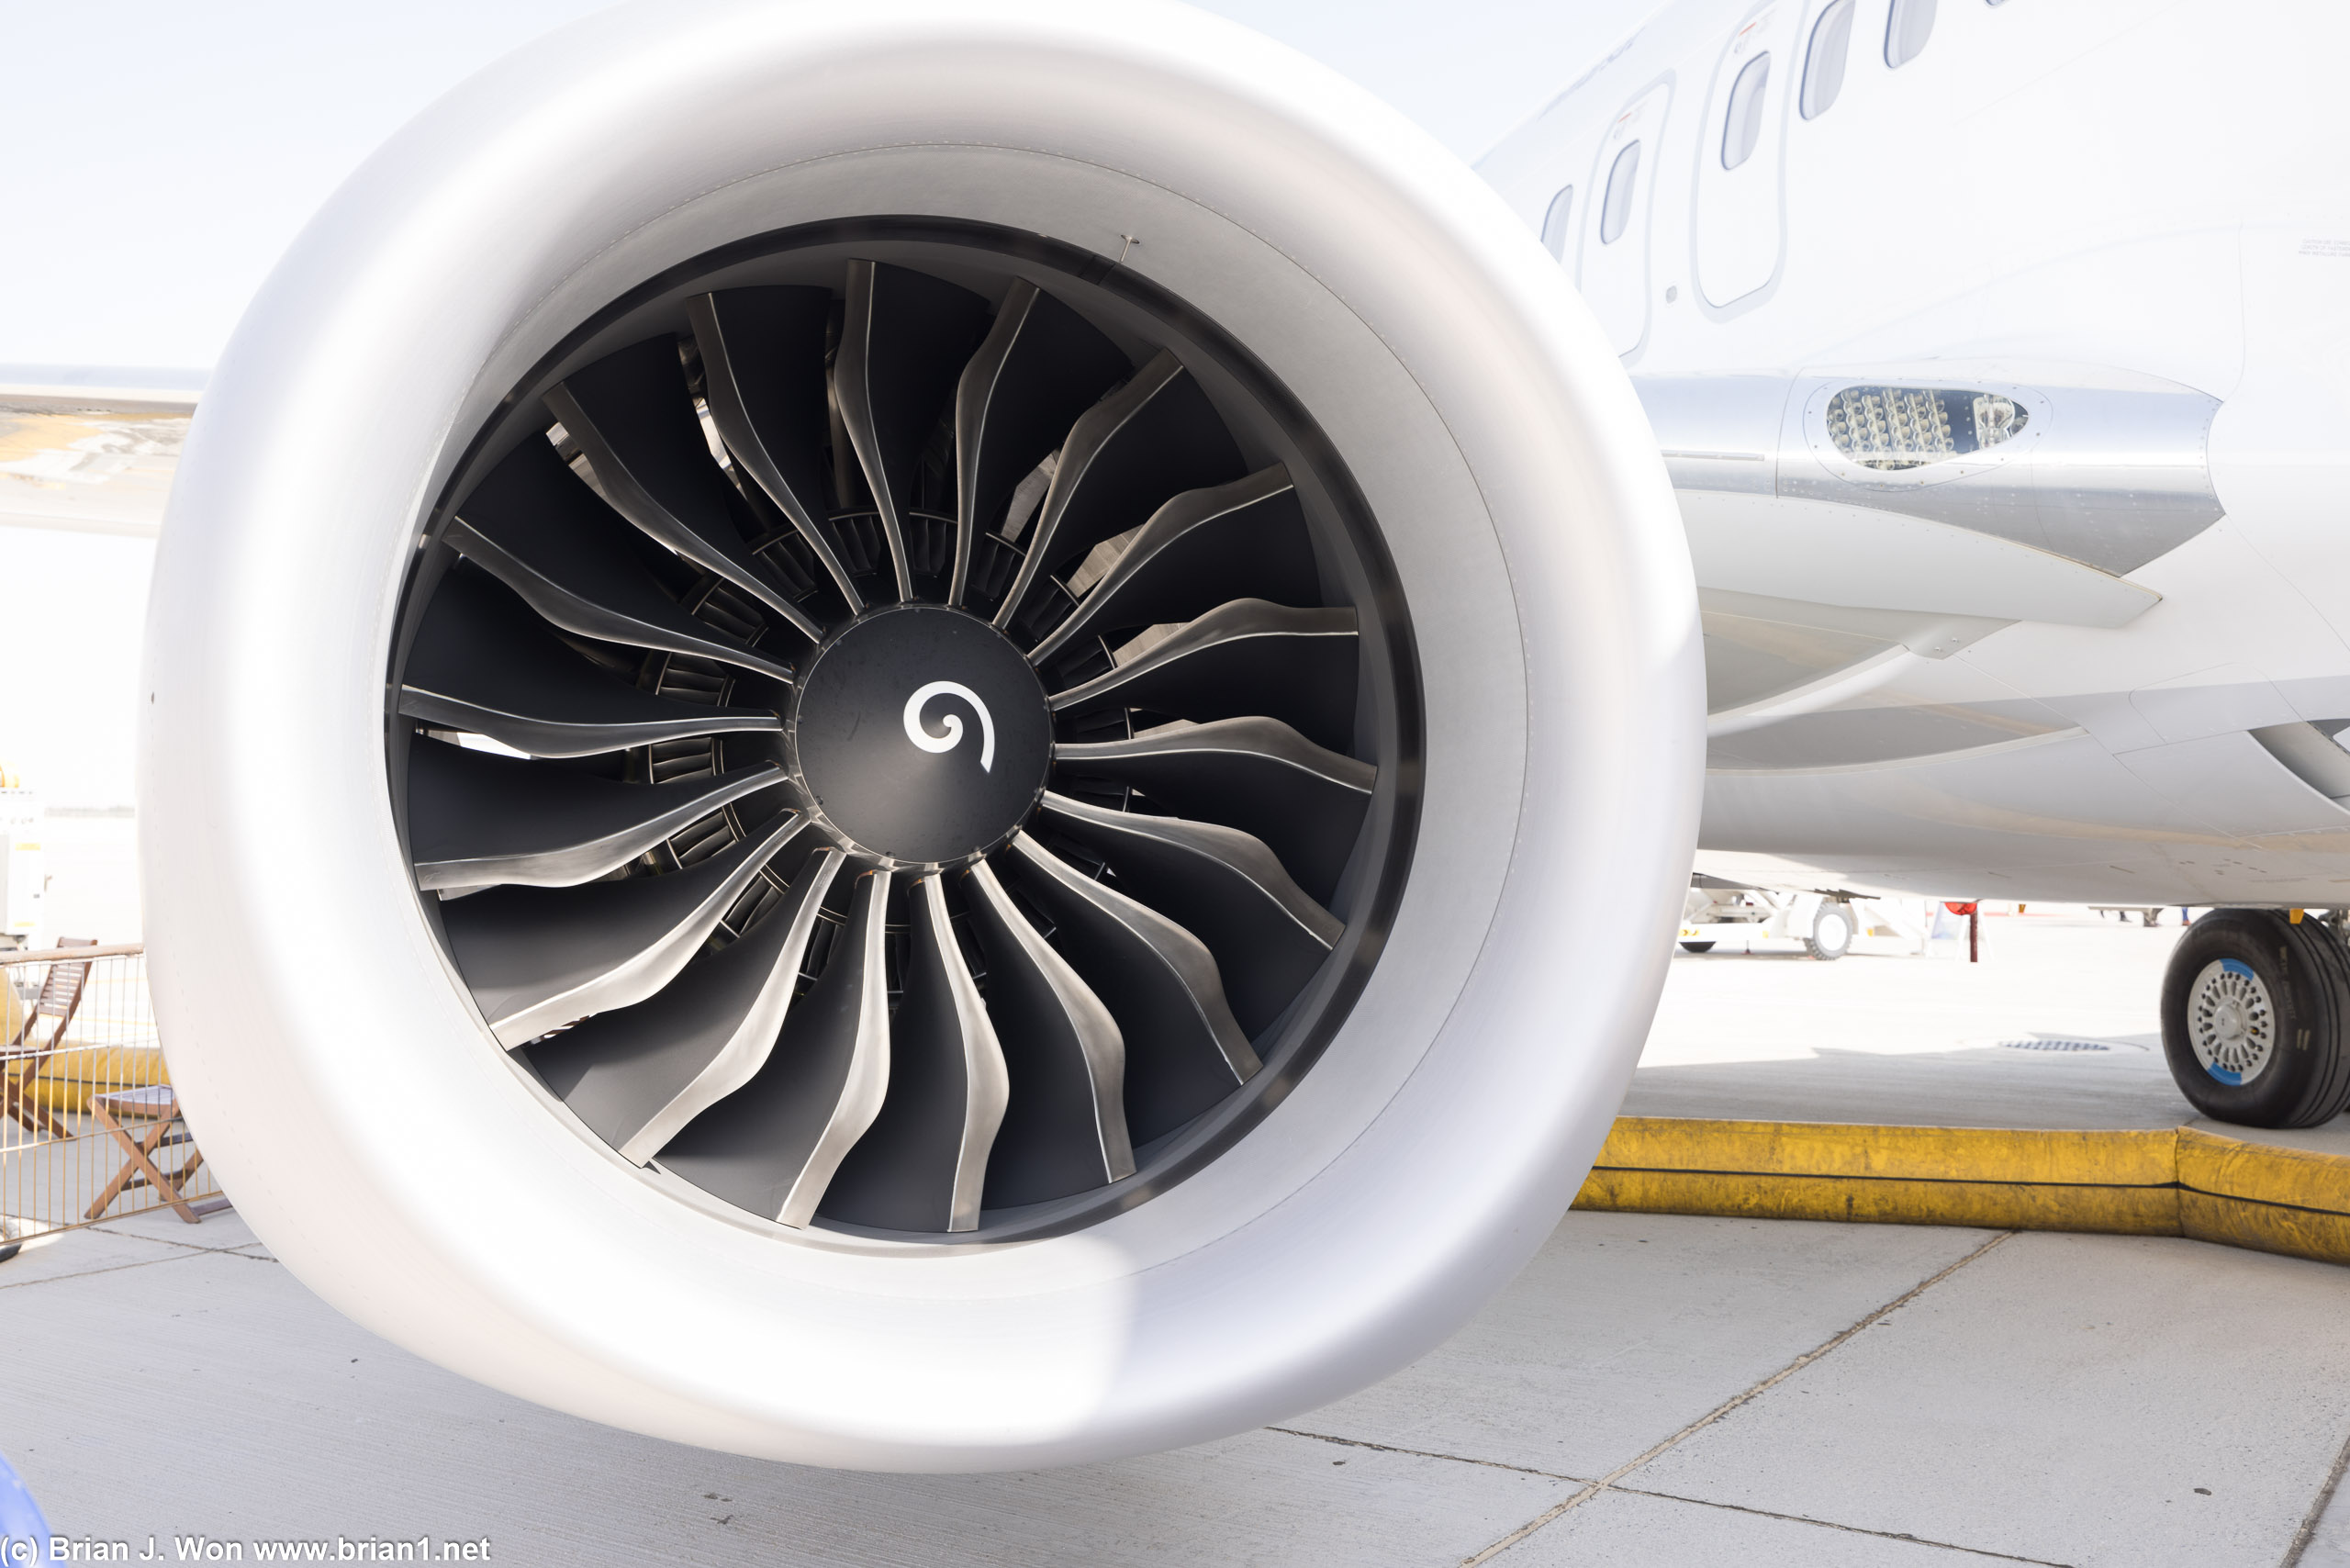 The CFM Leap under the 737 MAX looks tiny compared to some of the other modern engines.